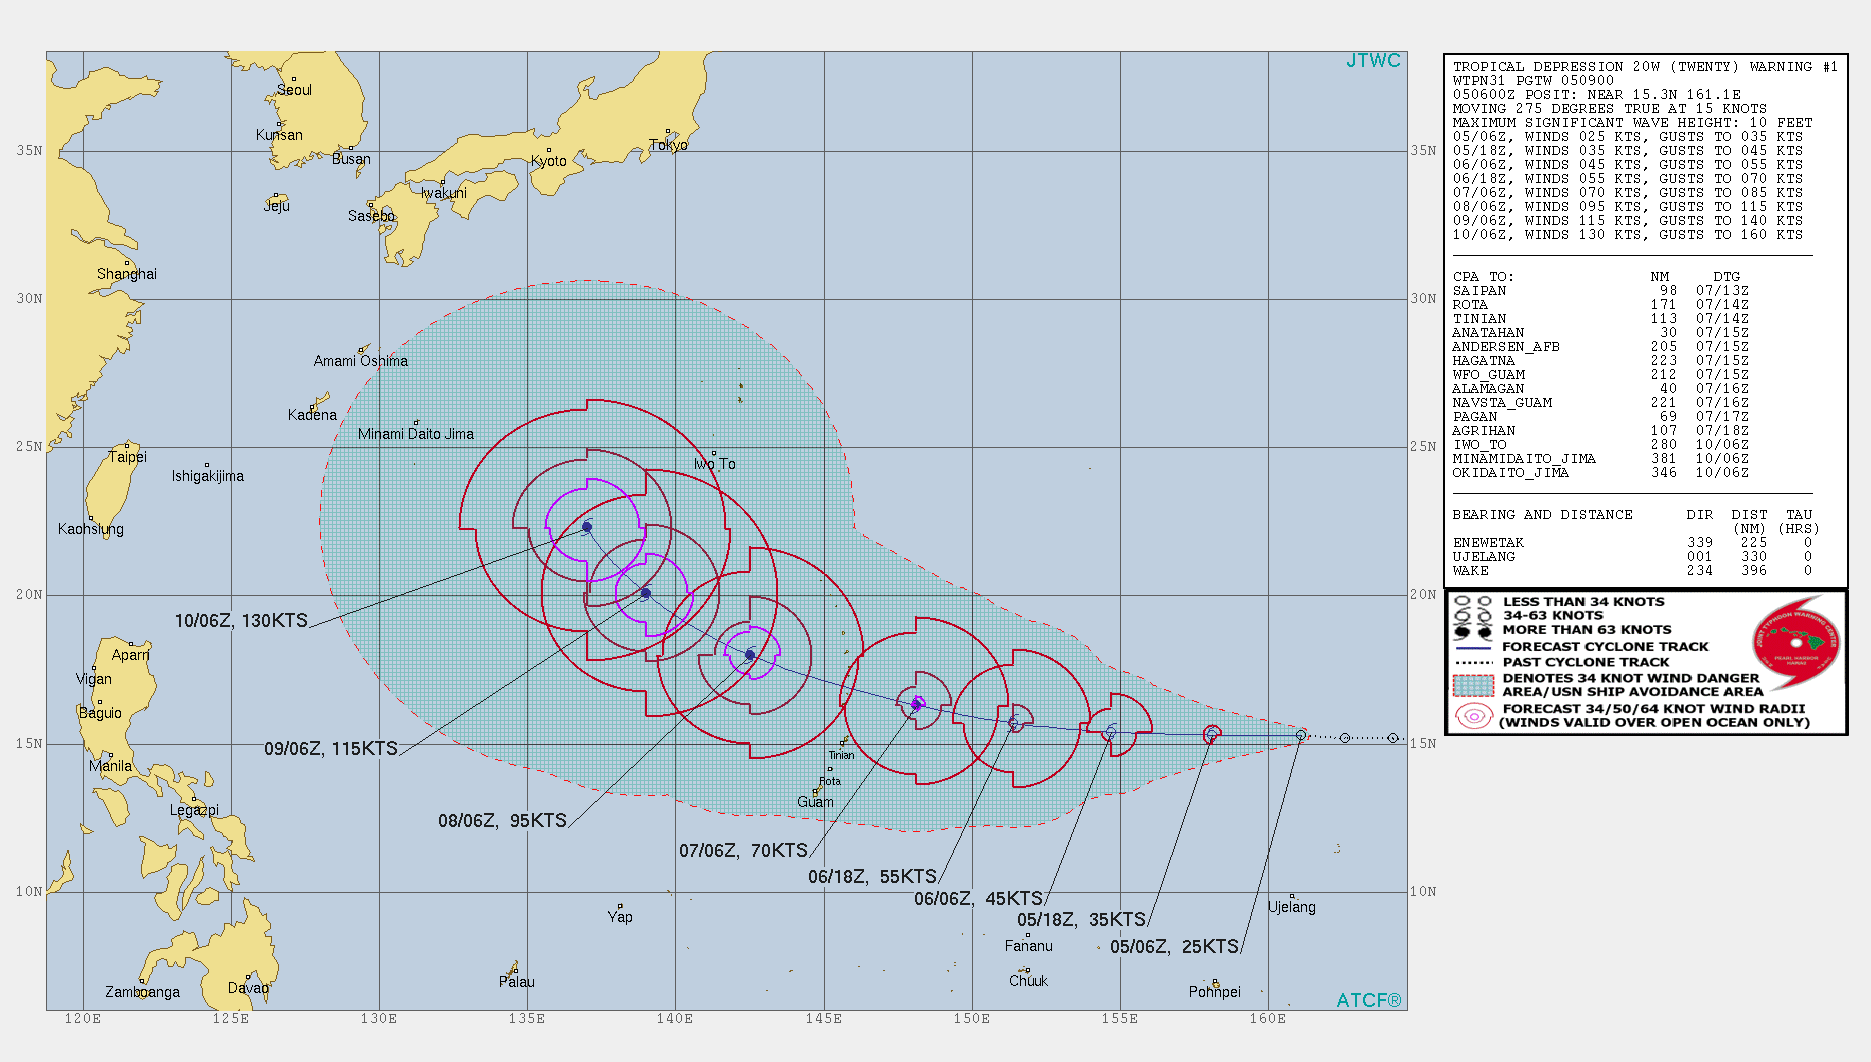 FORECAST TO REACH SUPER TYPHOON INTENSITY IN 120H